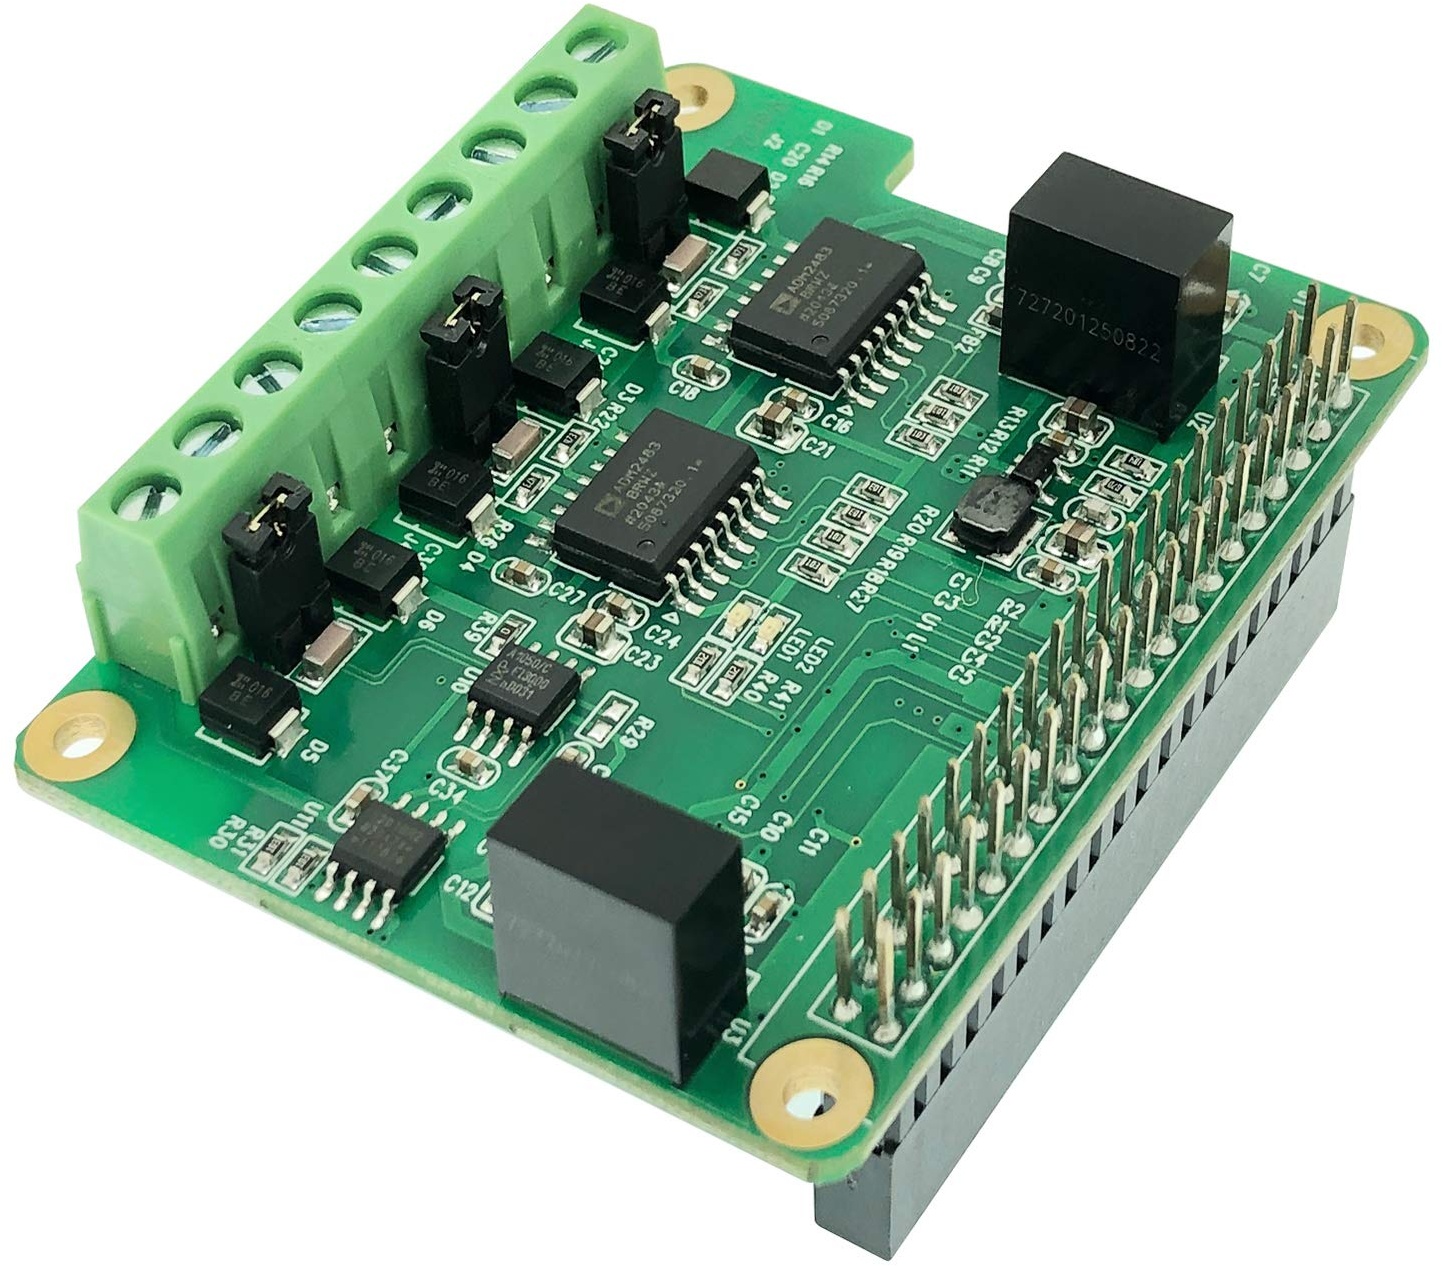 RS485 CAN HAT for Raspberry Pi Via SPI Onboard 1 x CAN Bus MCP2515 Transceiver 2 x RS485 Bus SC16IS1752, Signal and Power Isolated, ESD Protection Port, Stable Long-Distance Communication Module